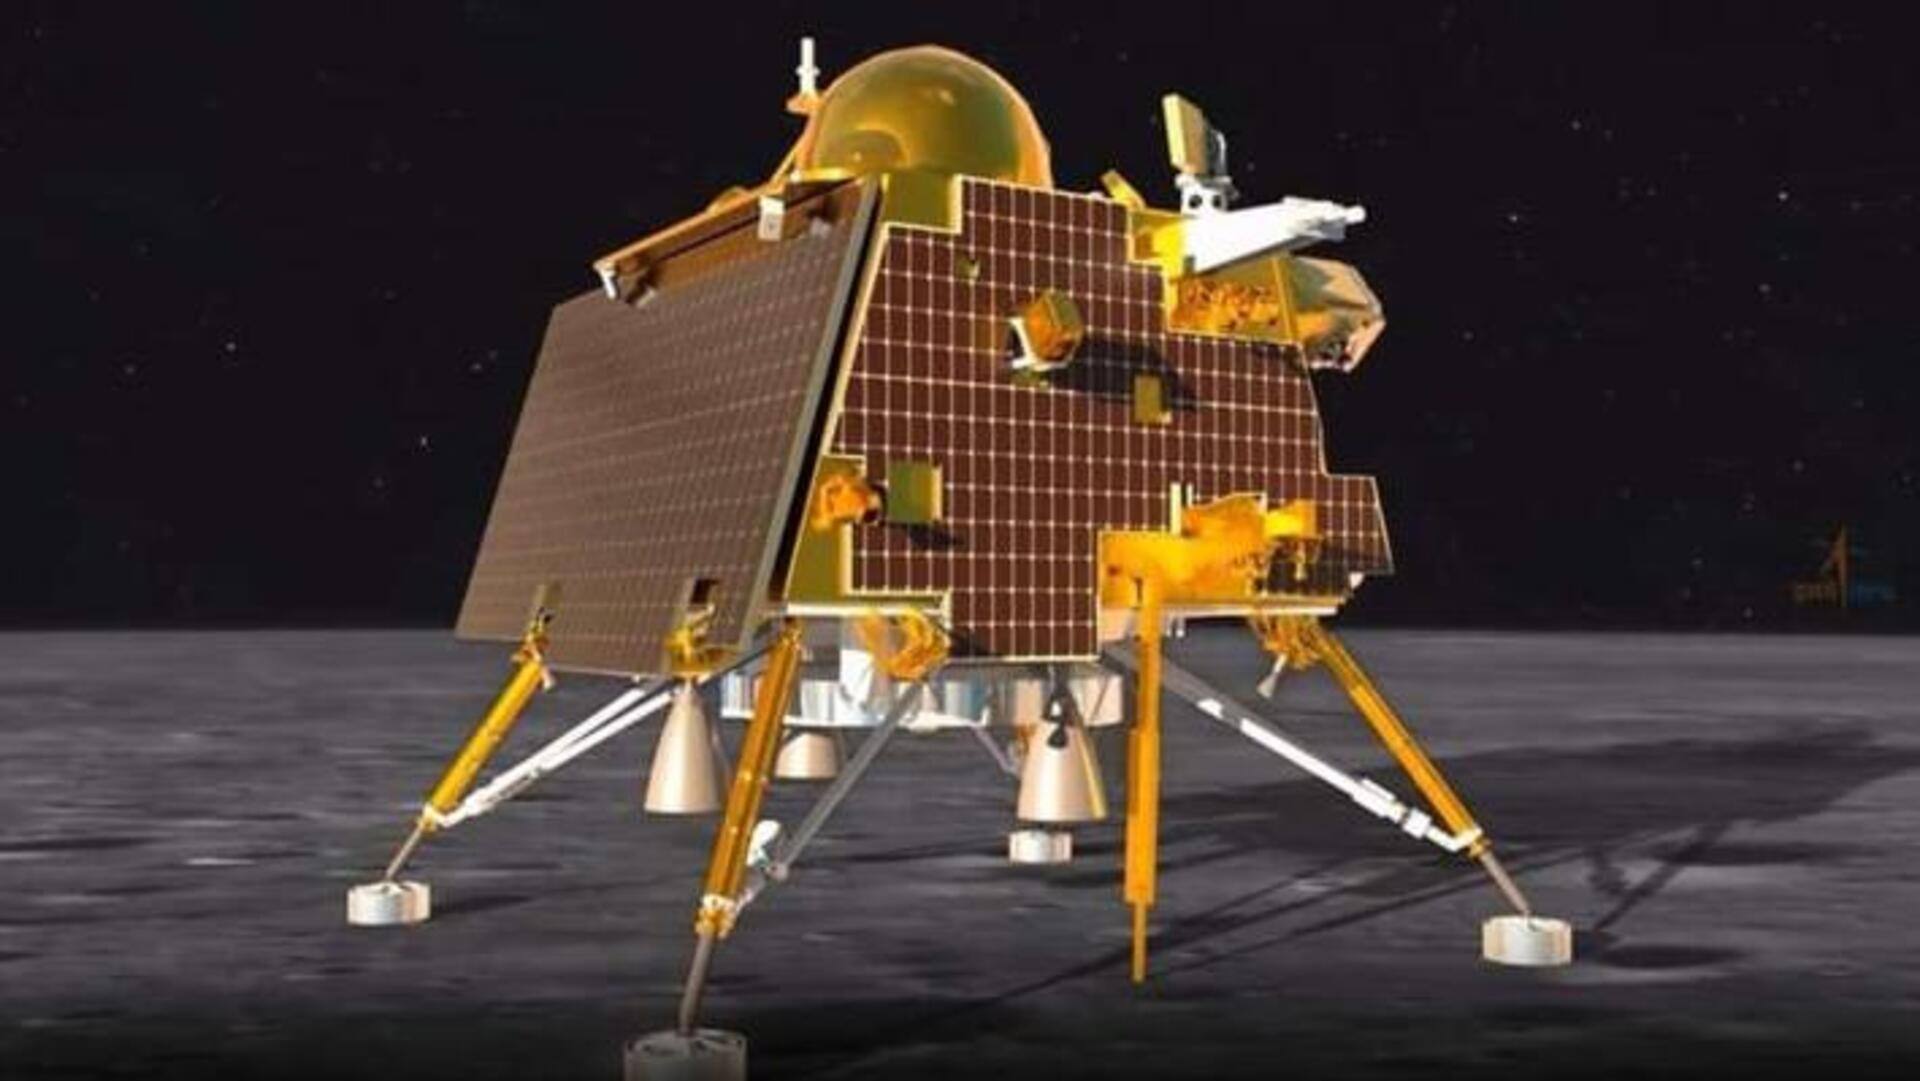 Chandrayaan-3's lander performing hop experiment was unplanned, says ISRO official